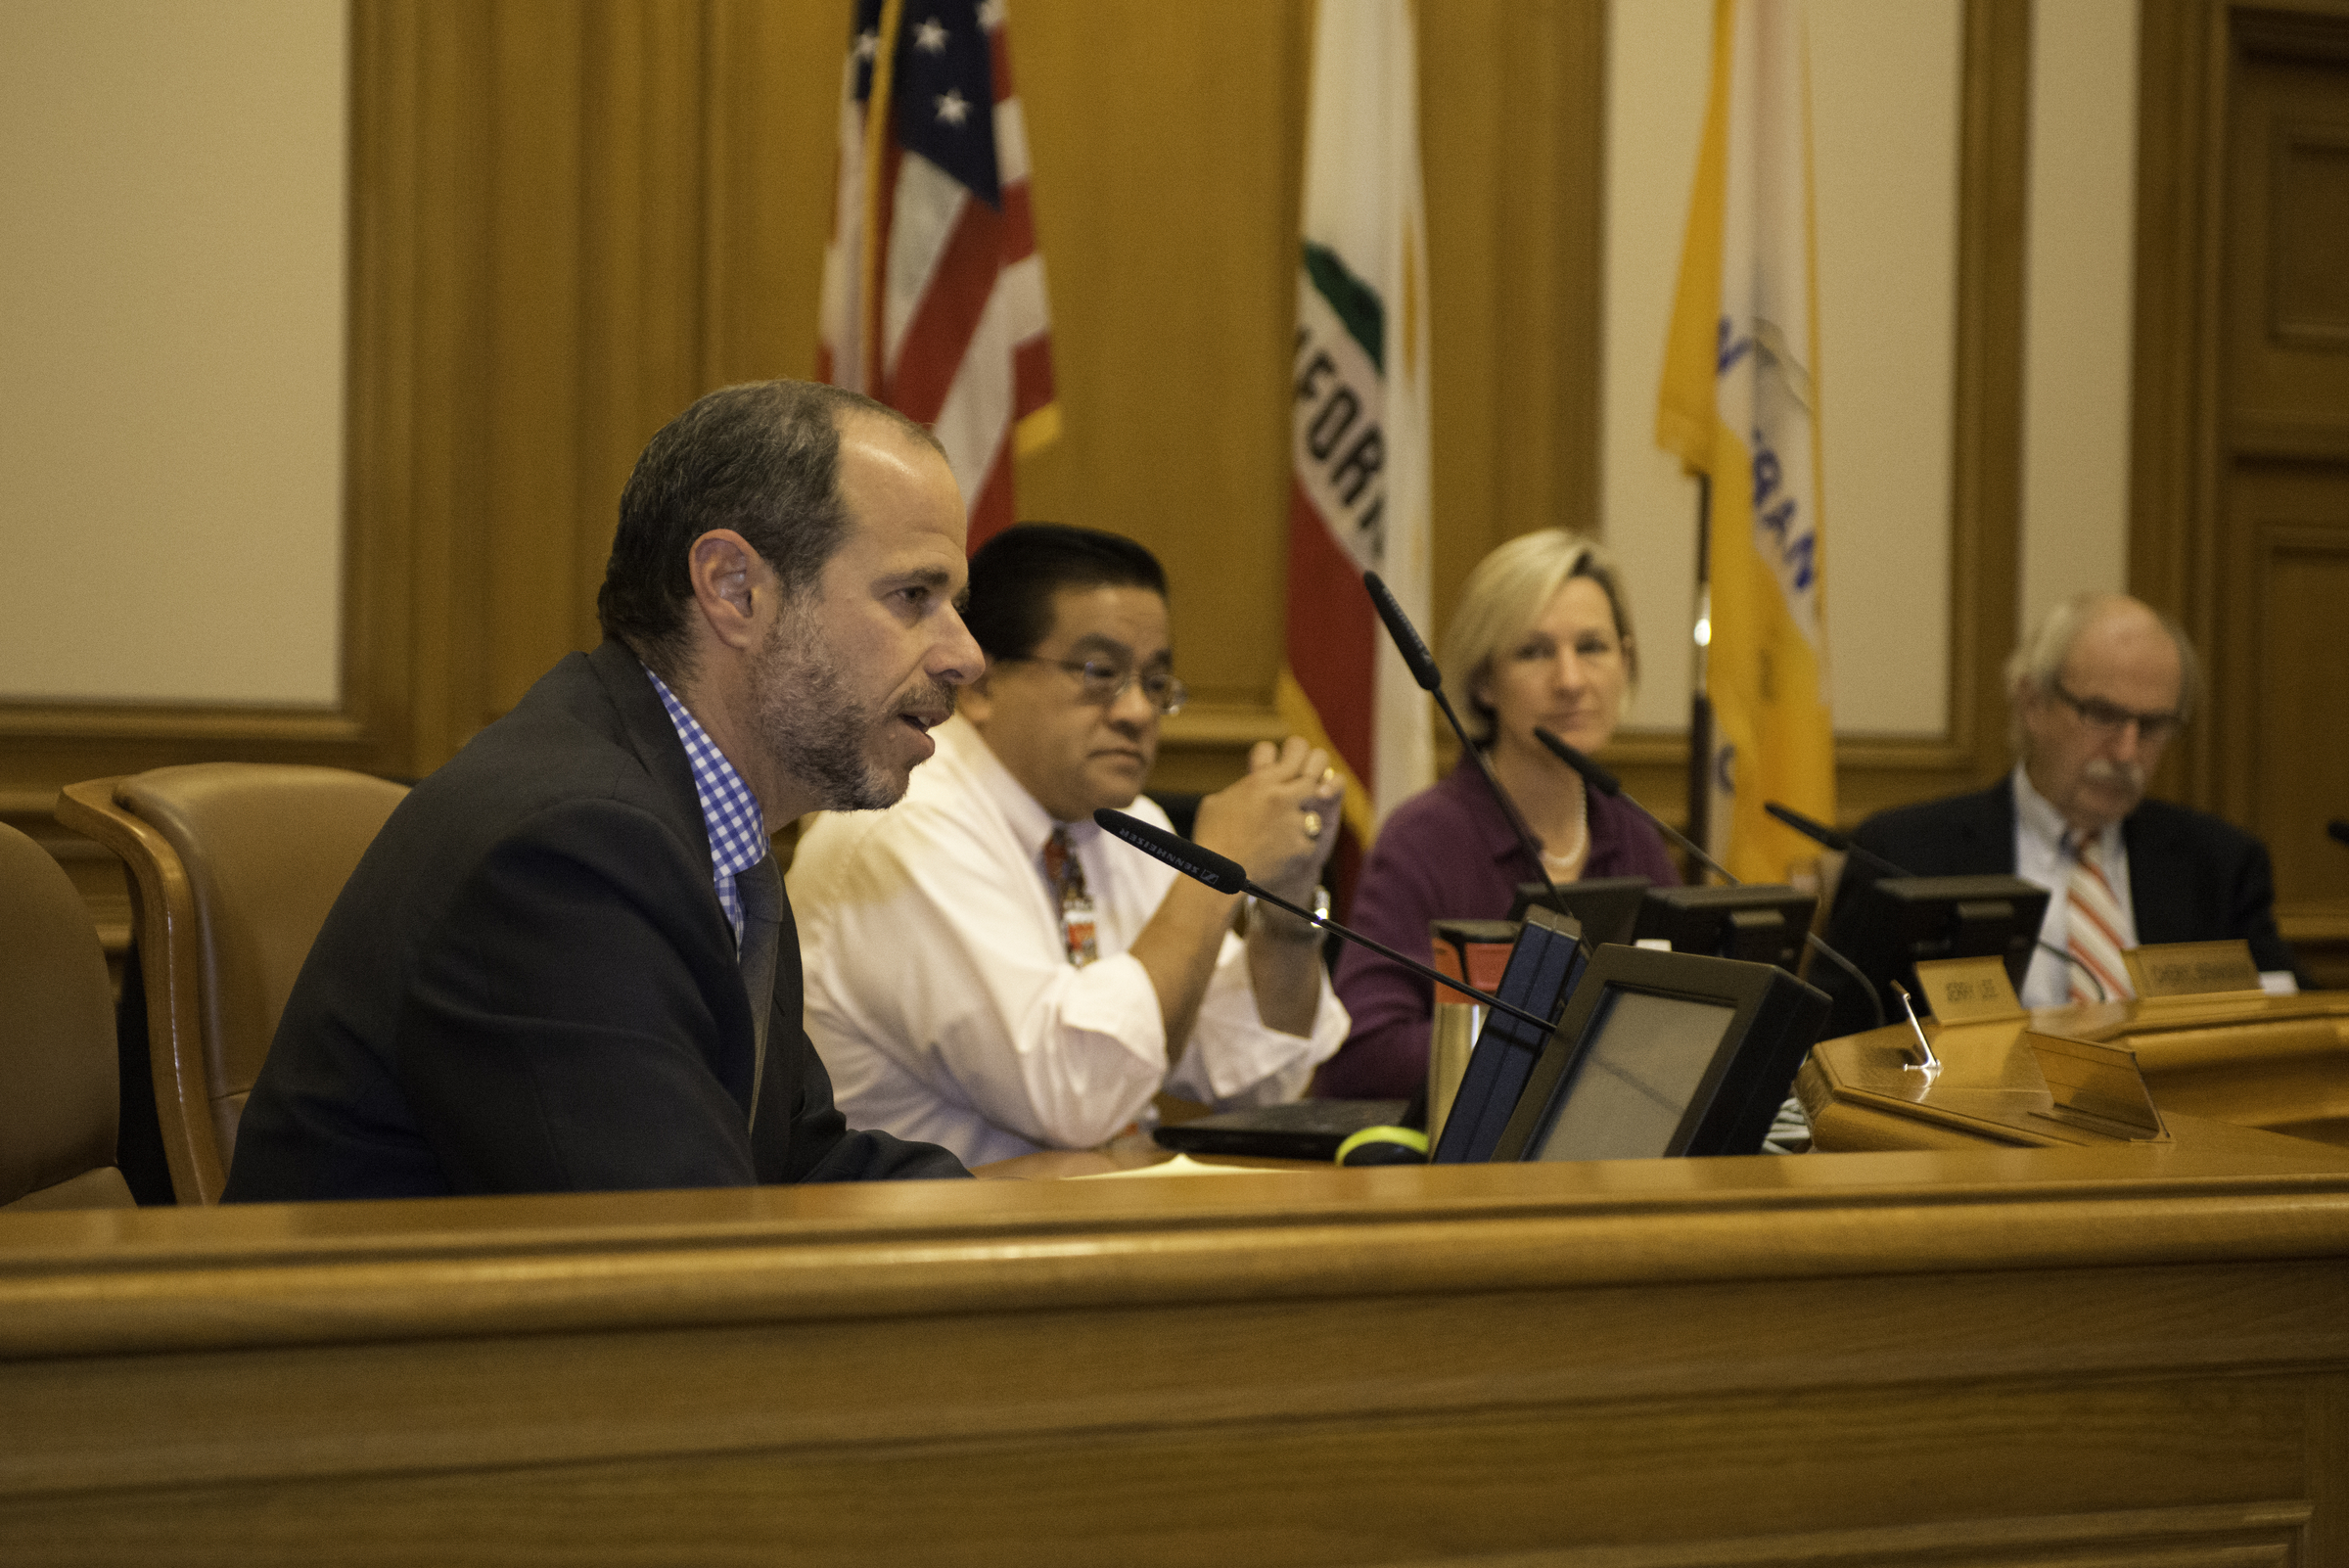 Right to Left: Ed Reiskin, Jerry Lee, Cheryl Brinkman and Tom Nolan at SFMTA Board of Directors Meeting in City Hall